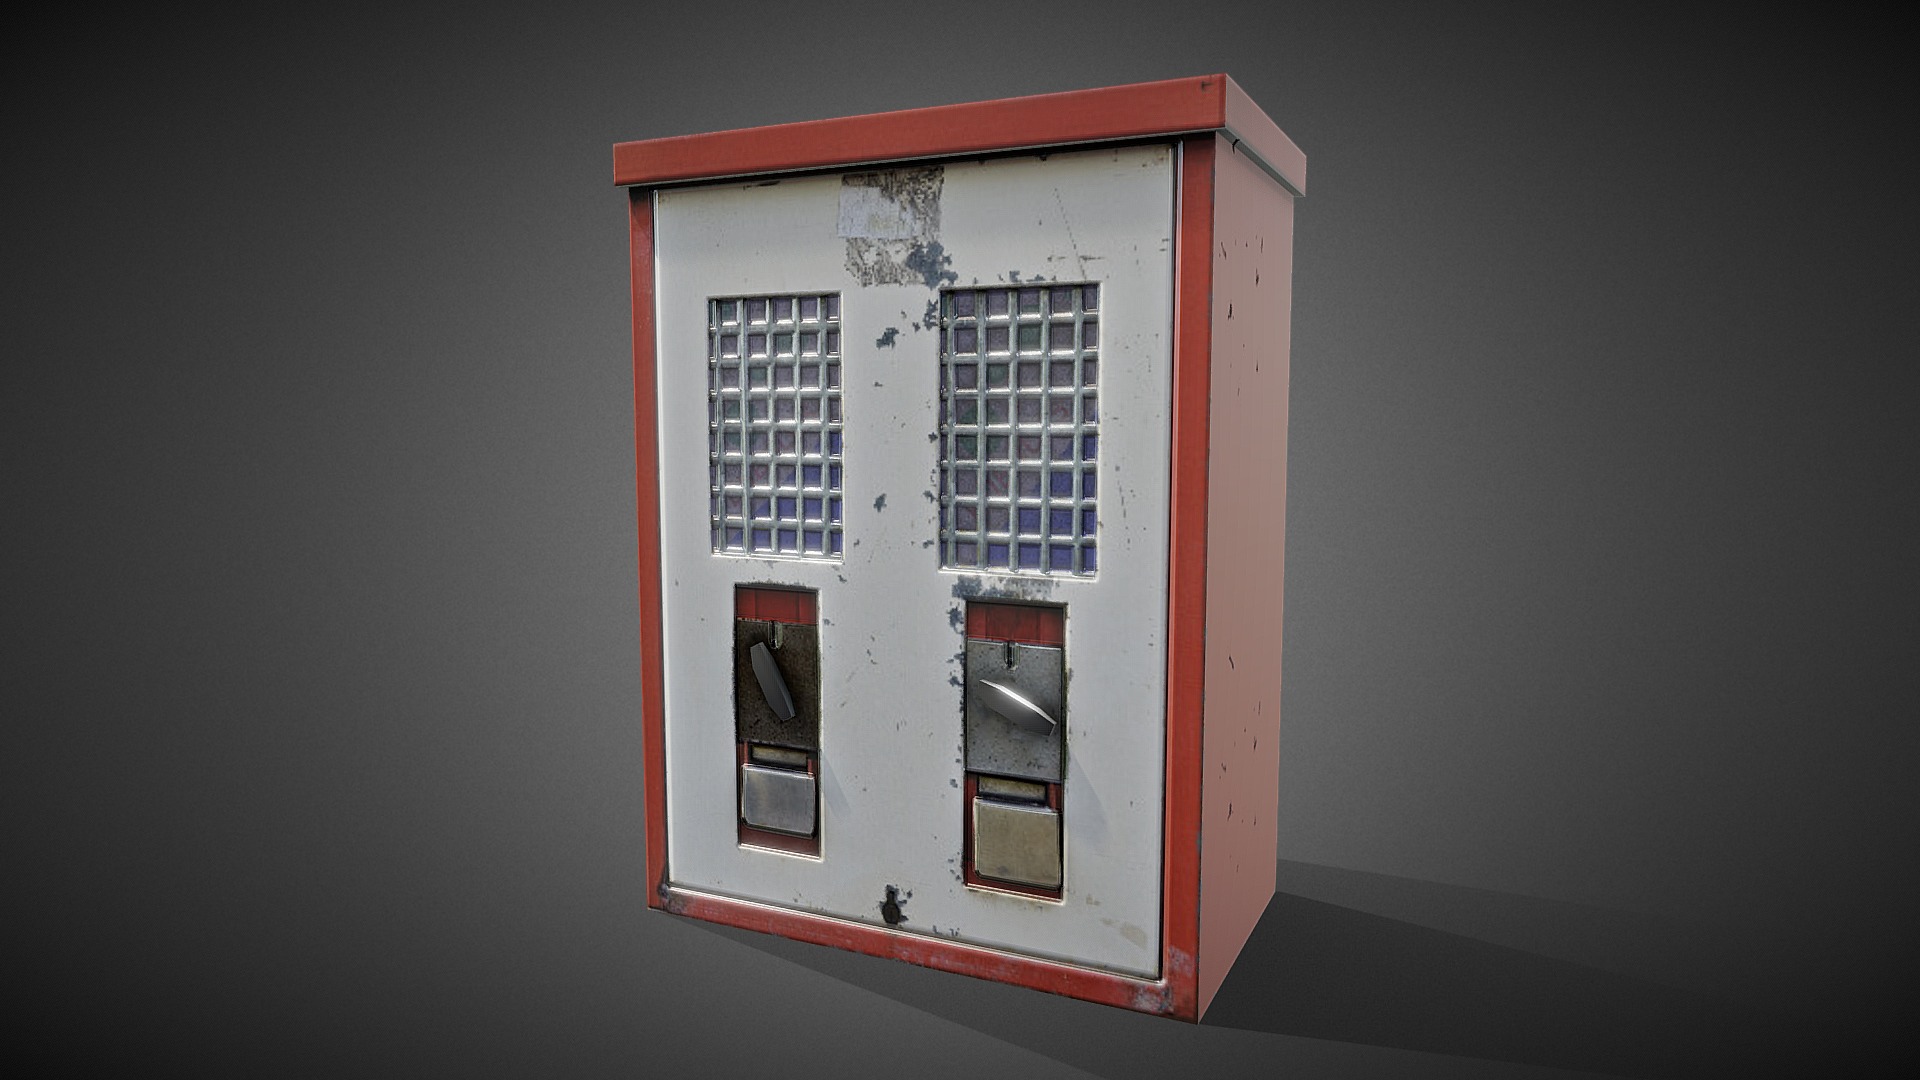 3D model Gumball-Machine - This is a 3D model of the Gumball-Machine. The 3D model is about a red and white box with a window.